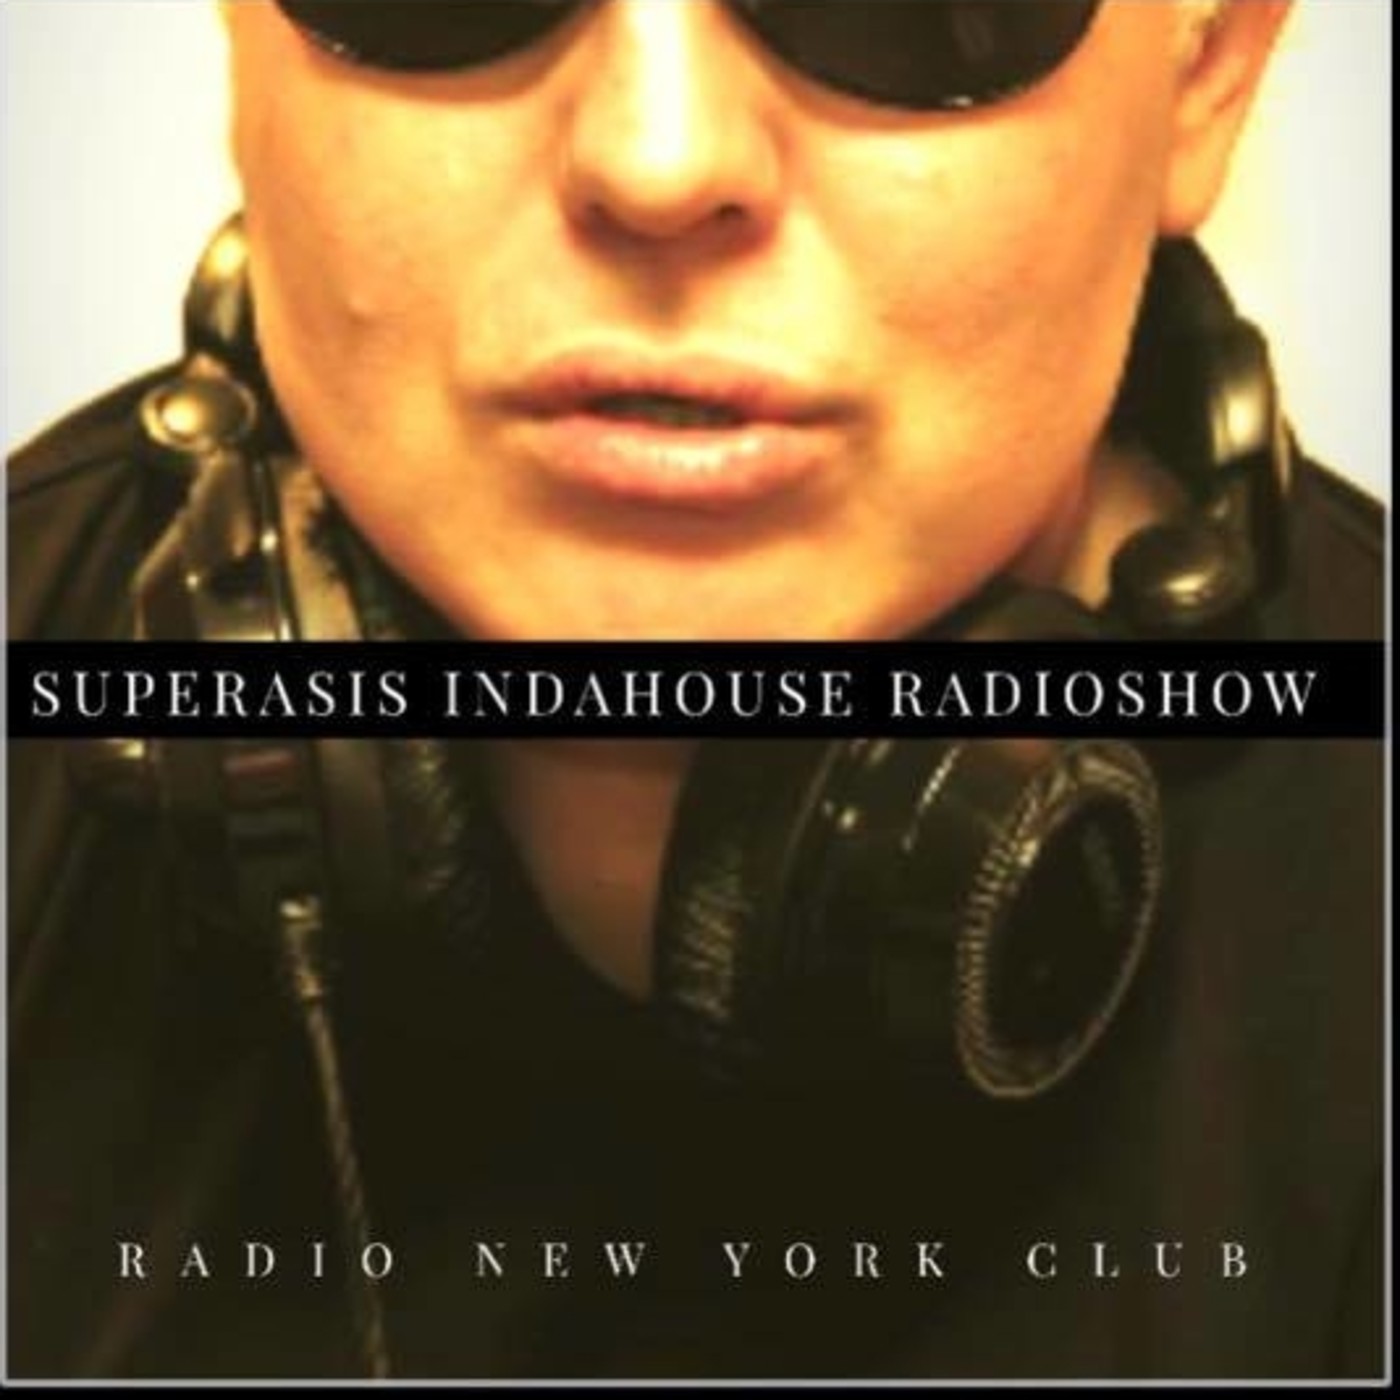 35-Superasis Indahouse-Radioshow at Funky Room NYC@IN SESSION.25.05.2017